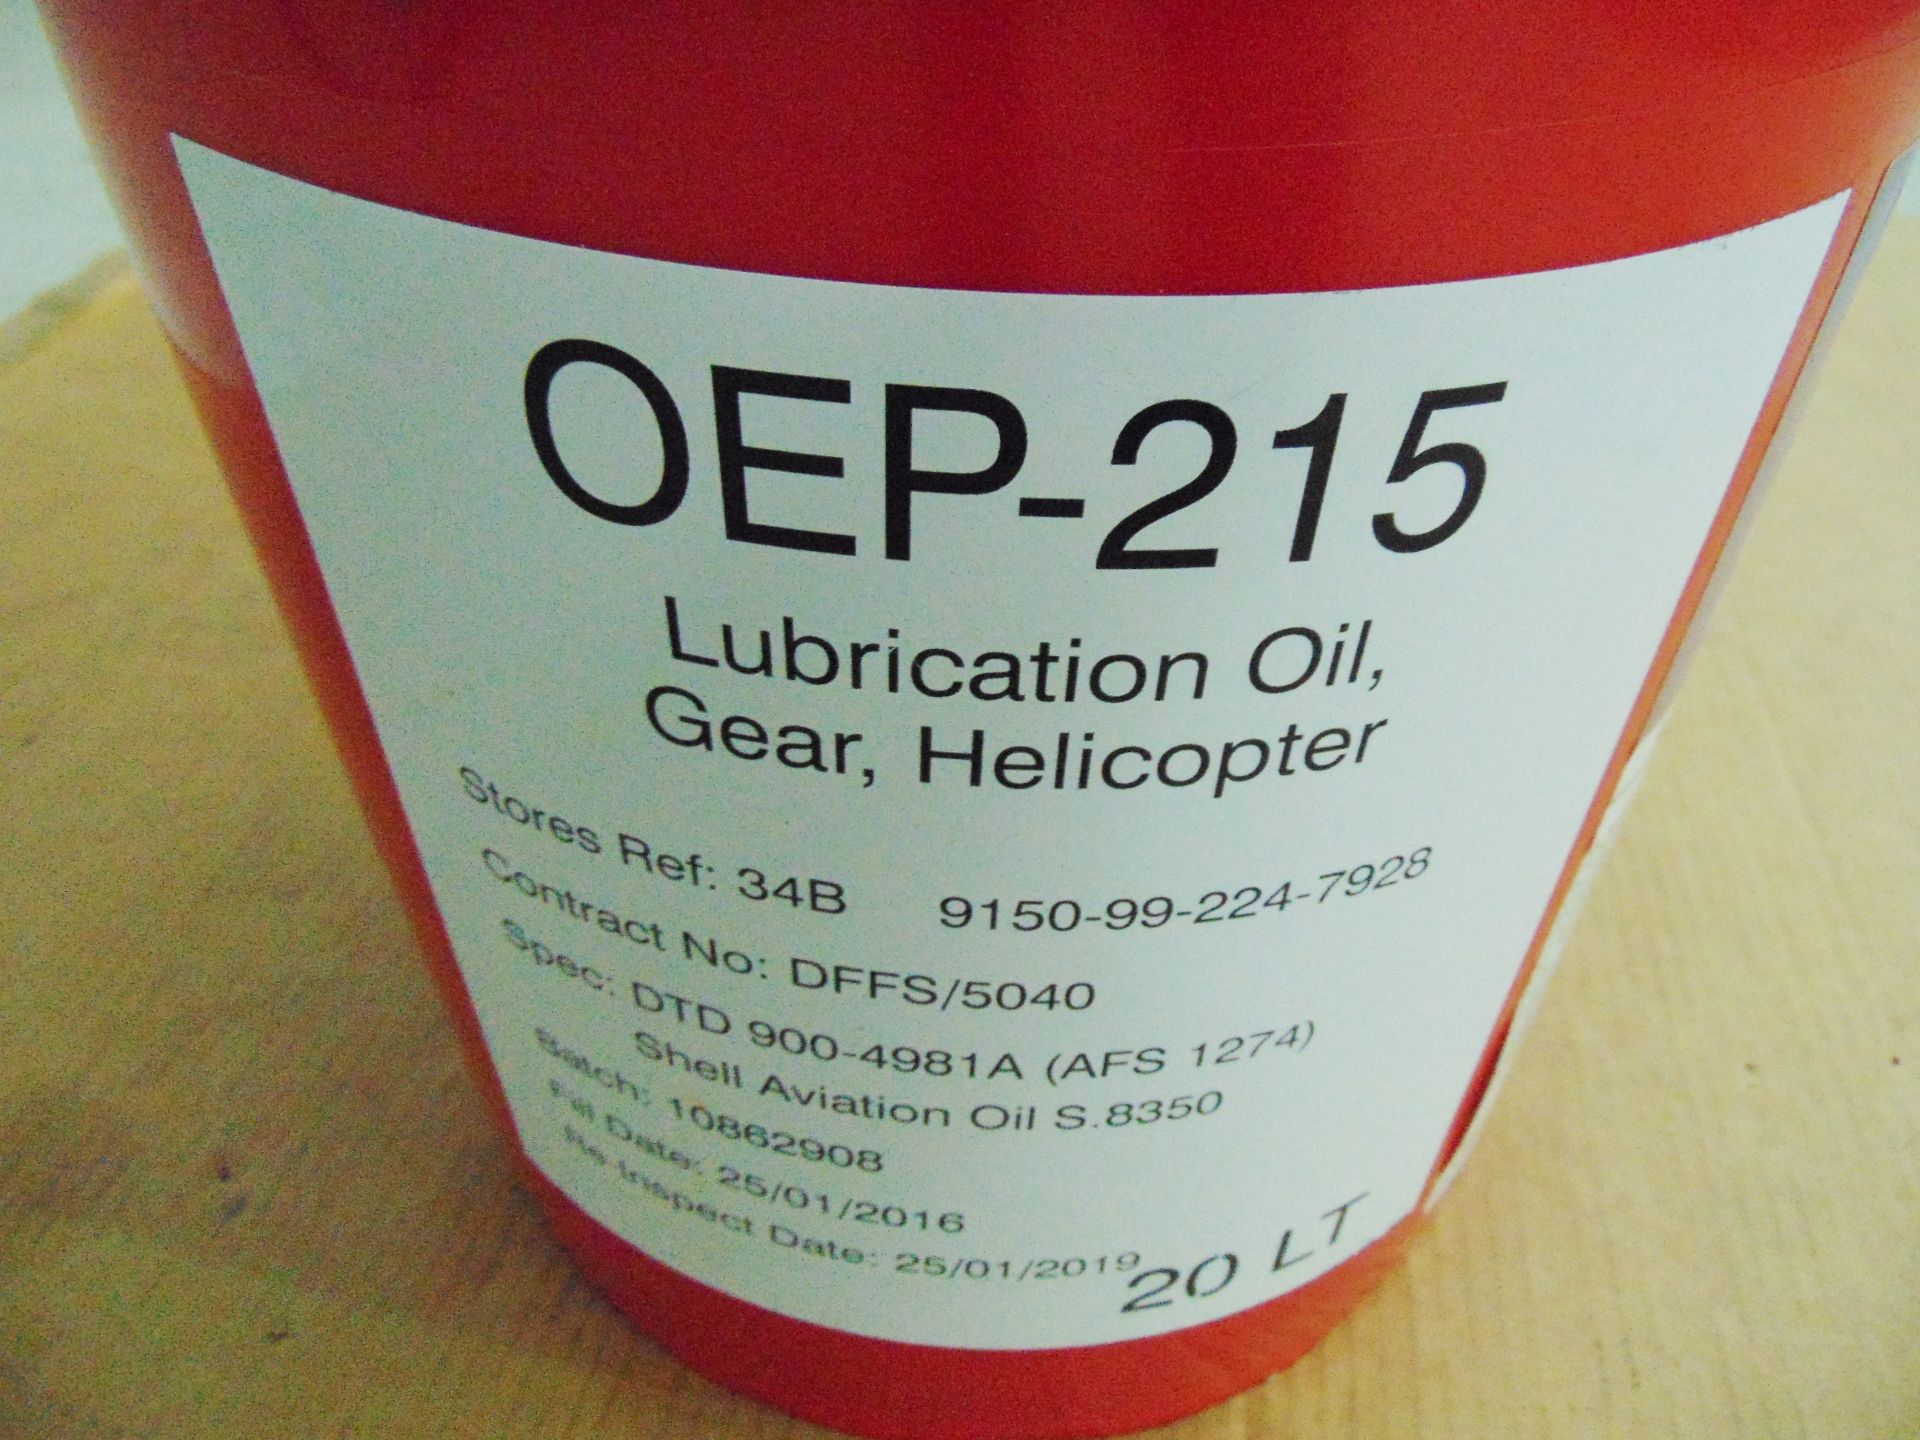 1 x Unissued 20L Drum of Aeroshell S.8350 Helicopter Lubricating Oil - Image 4 of 4